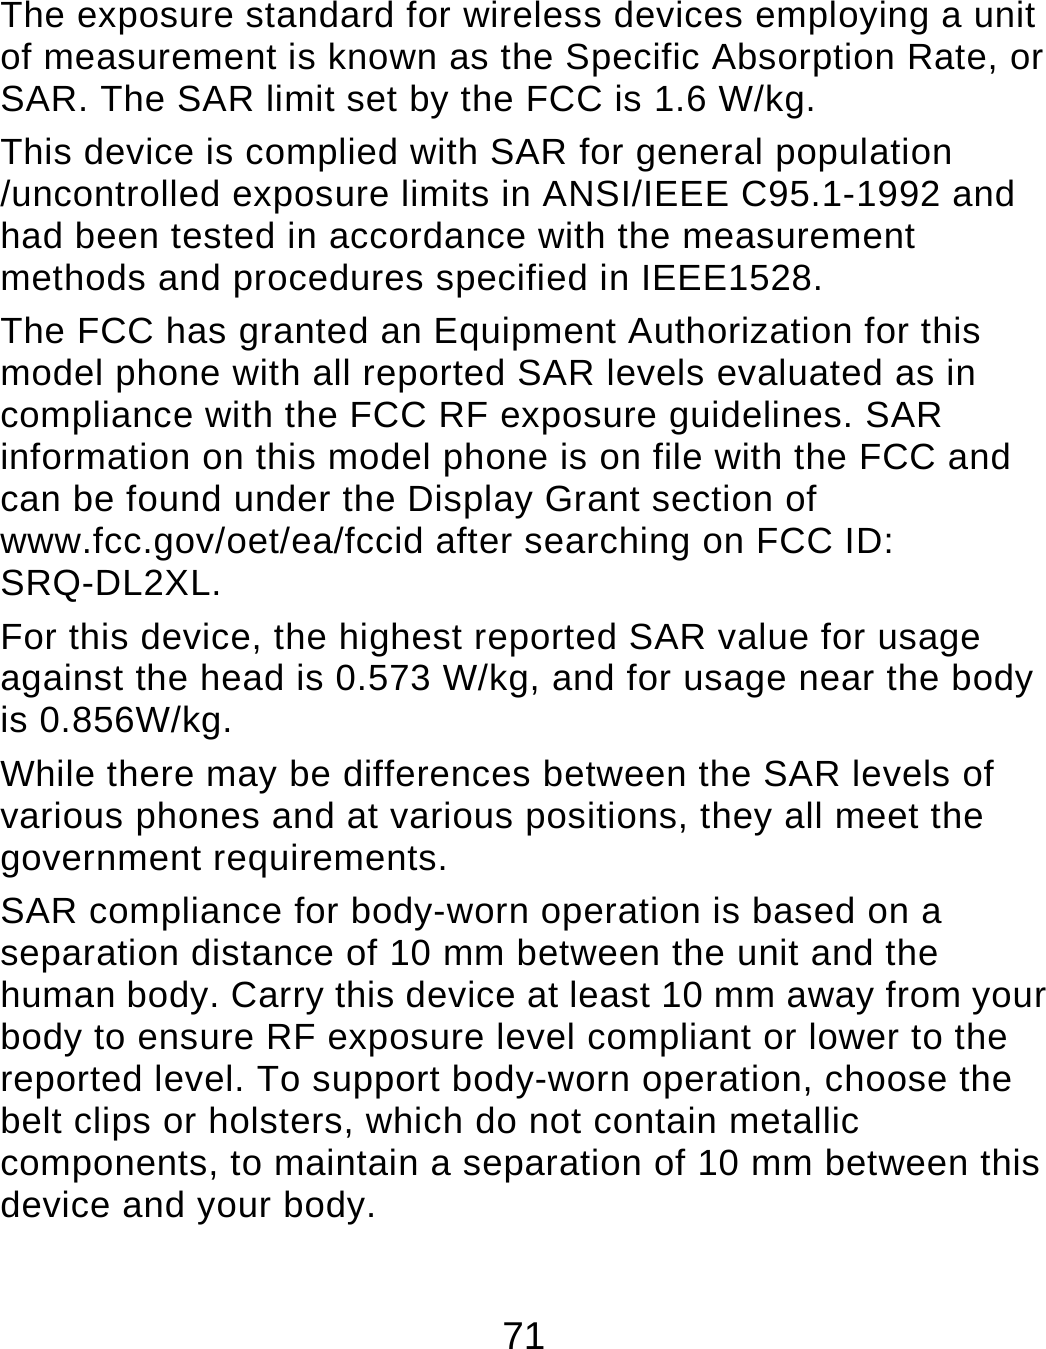 71 The exposure standard for wireless devices employing a unit of measurement is known as the Specific Absorption Rate, or SAR. The SAR limit set by the FCC is 1.6 W/kg.     This device is complied with SAR for general population /uncontrolled exposure limits in ANSI/IEEE C95.1-1992 and had been tested in accordance with the measurement methods and procedures specified in IEEE1528. The FCC has granted an Equipment Authorization for this model phone with all reported SAR levels evaluated as in compliance with the FCC RF exposure guidelines. SAR information on this model phone is on file with the FCC and can be found under the Display Grant section of www.fcc.gov/oet/ea/fccid after searching on FCC ID: SRQ-DL2XL. For this device, the highest reported SAR value for usage against the head is 0.573 W/kg, and for usage near the body is 0.856W/kg. While there may be differences between the SAR levels of various phones and at various positions, they all meet the government requirements. SAR compliance for body-worn operation is based on a separation distance of 10 mm between the unit and the human body. Carry this device at least 10 mm away from your body to ensure RF exposure level compliant or lower to the reported level. To support body-worn operation, choose the belt clips or holsters, which do not contain metallic components, to maintain a separation of 10 mm between this device and your body.   